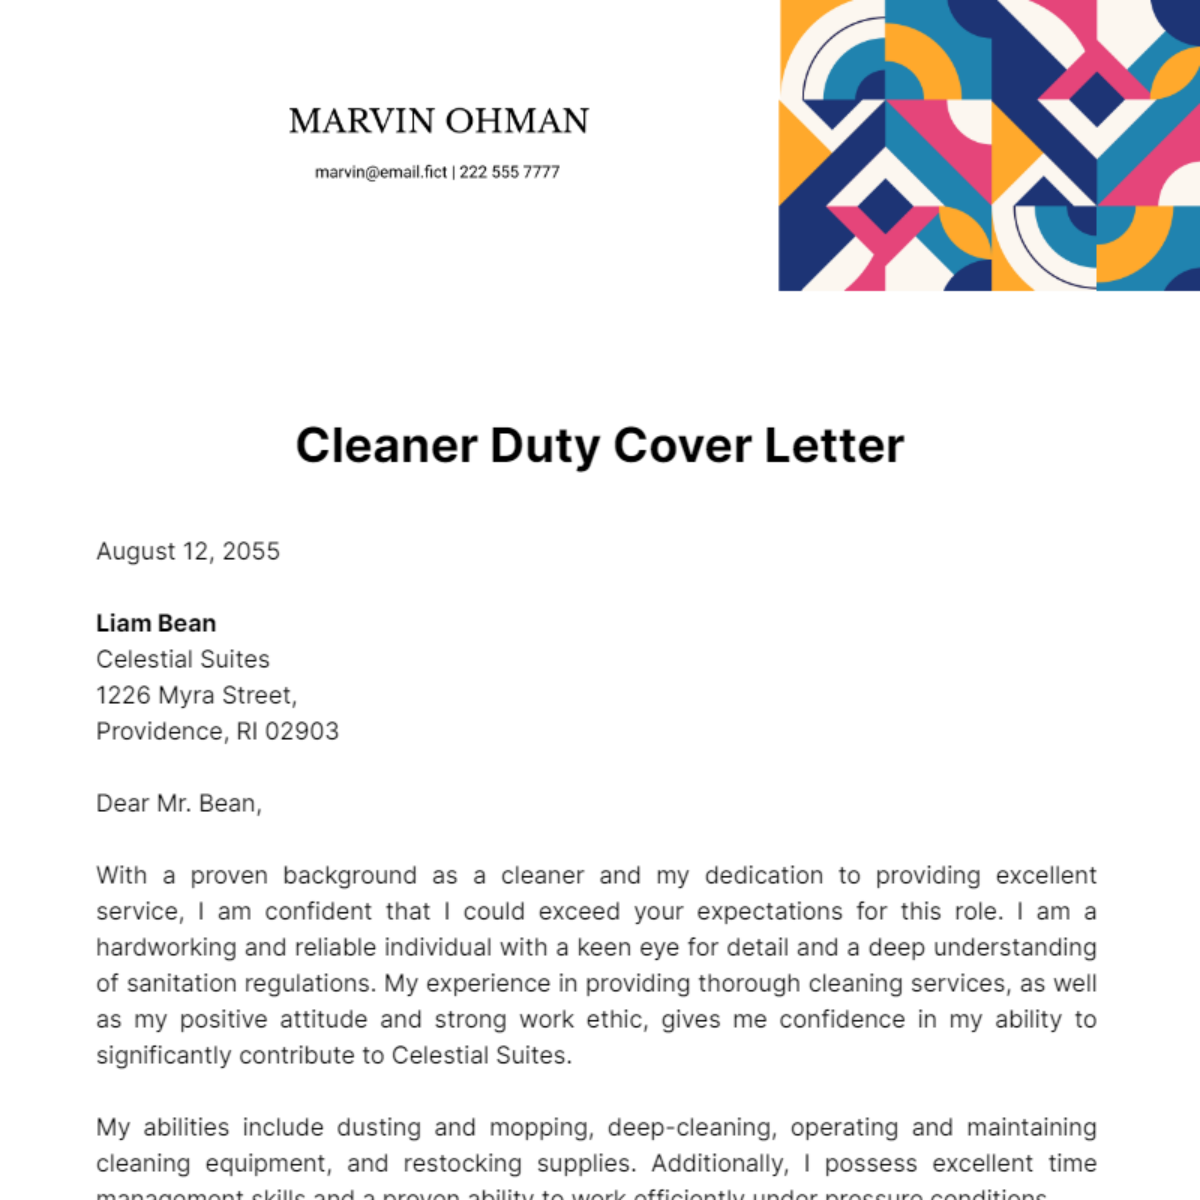 Cleaner Duty Cover Letter Template